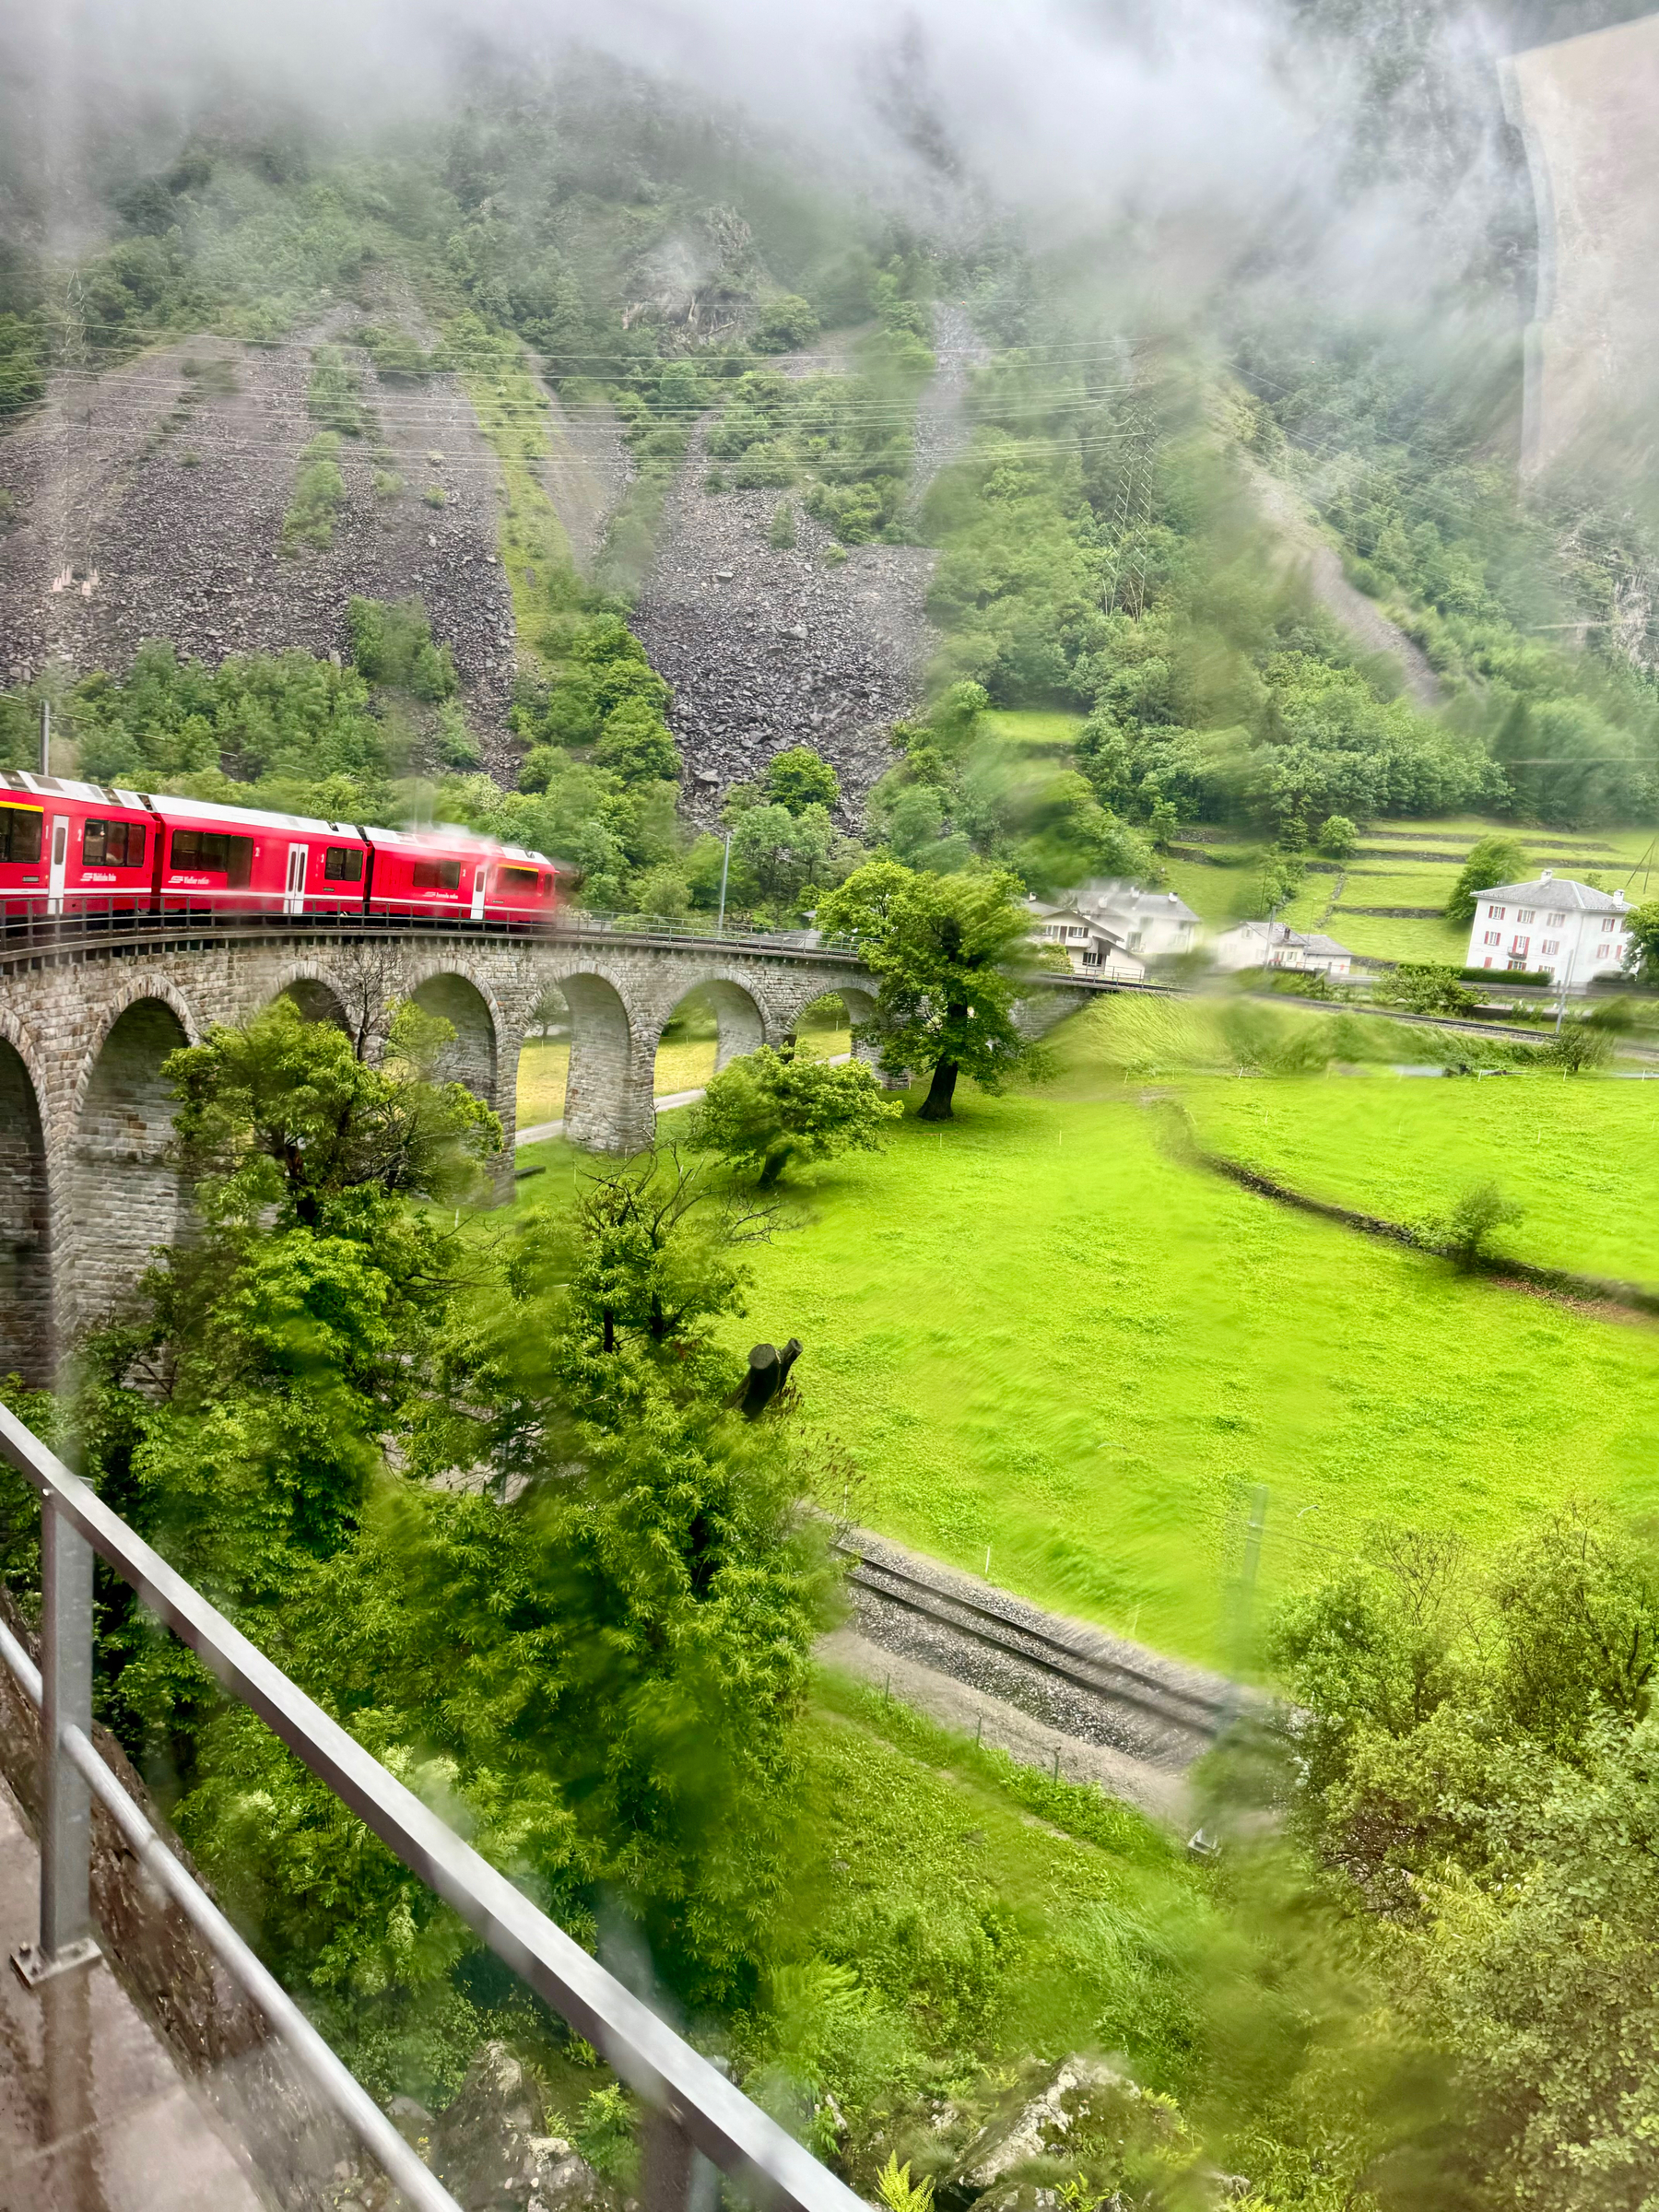 A red train traveling over a stone viaduct surrounded by lush, green landscape and hills. The foreground features a rail, and the image is slightly blurred and streaked, possibly due to raindrops on the camera lens.